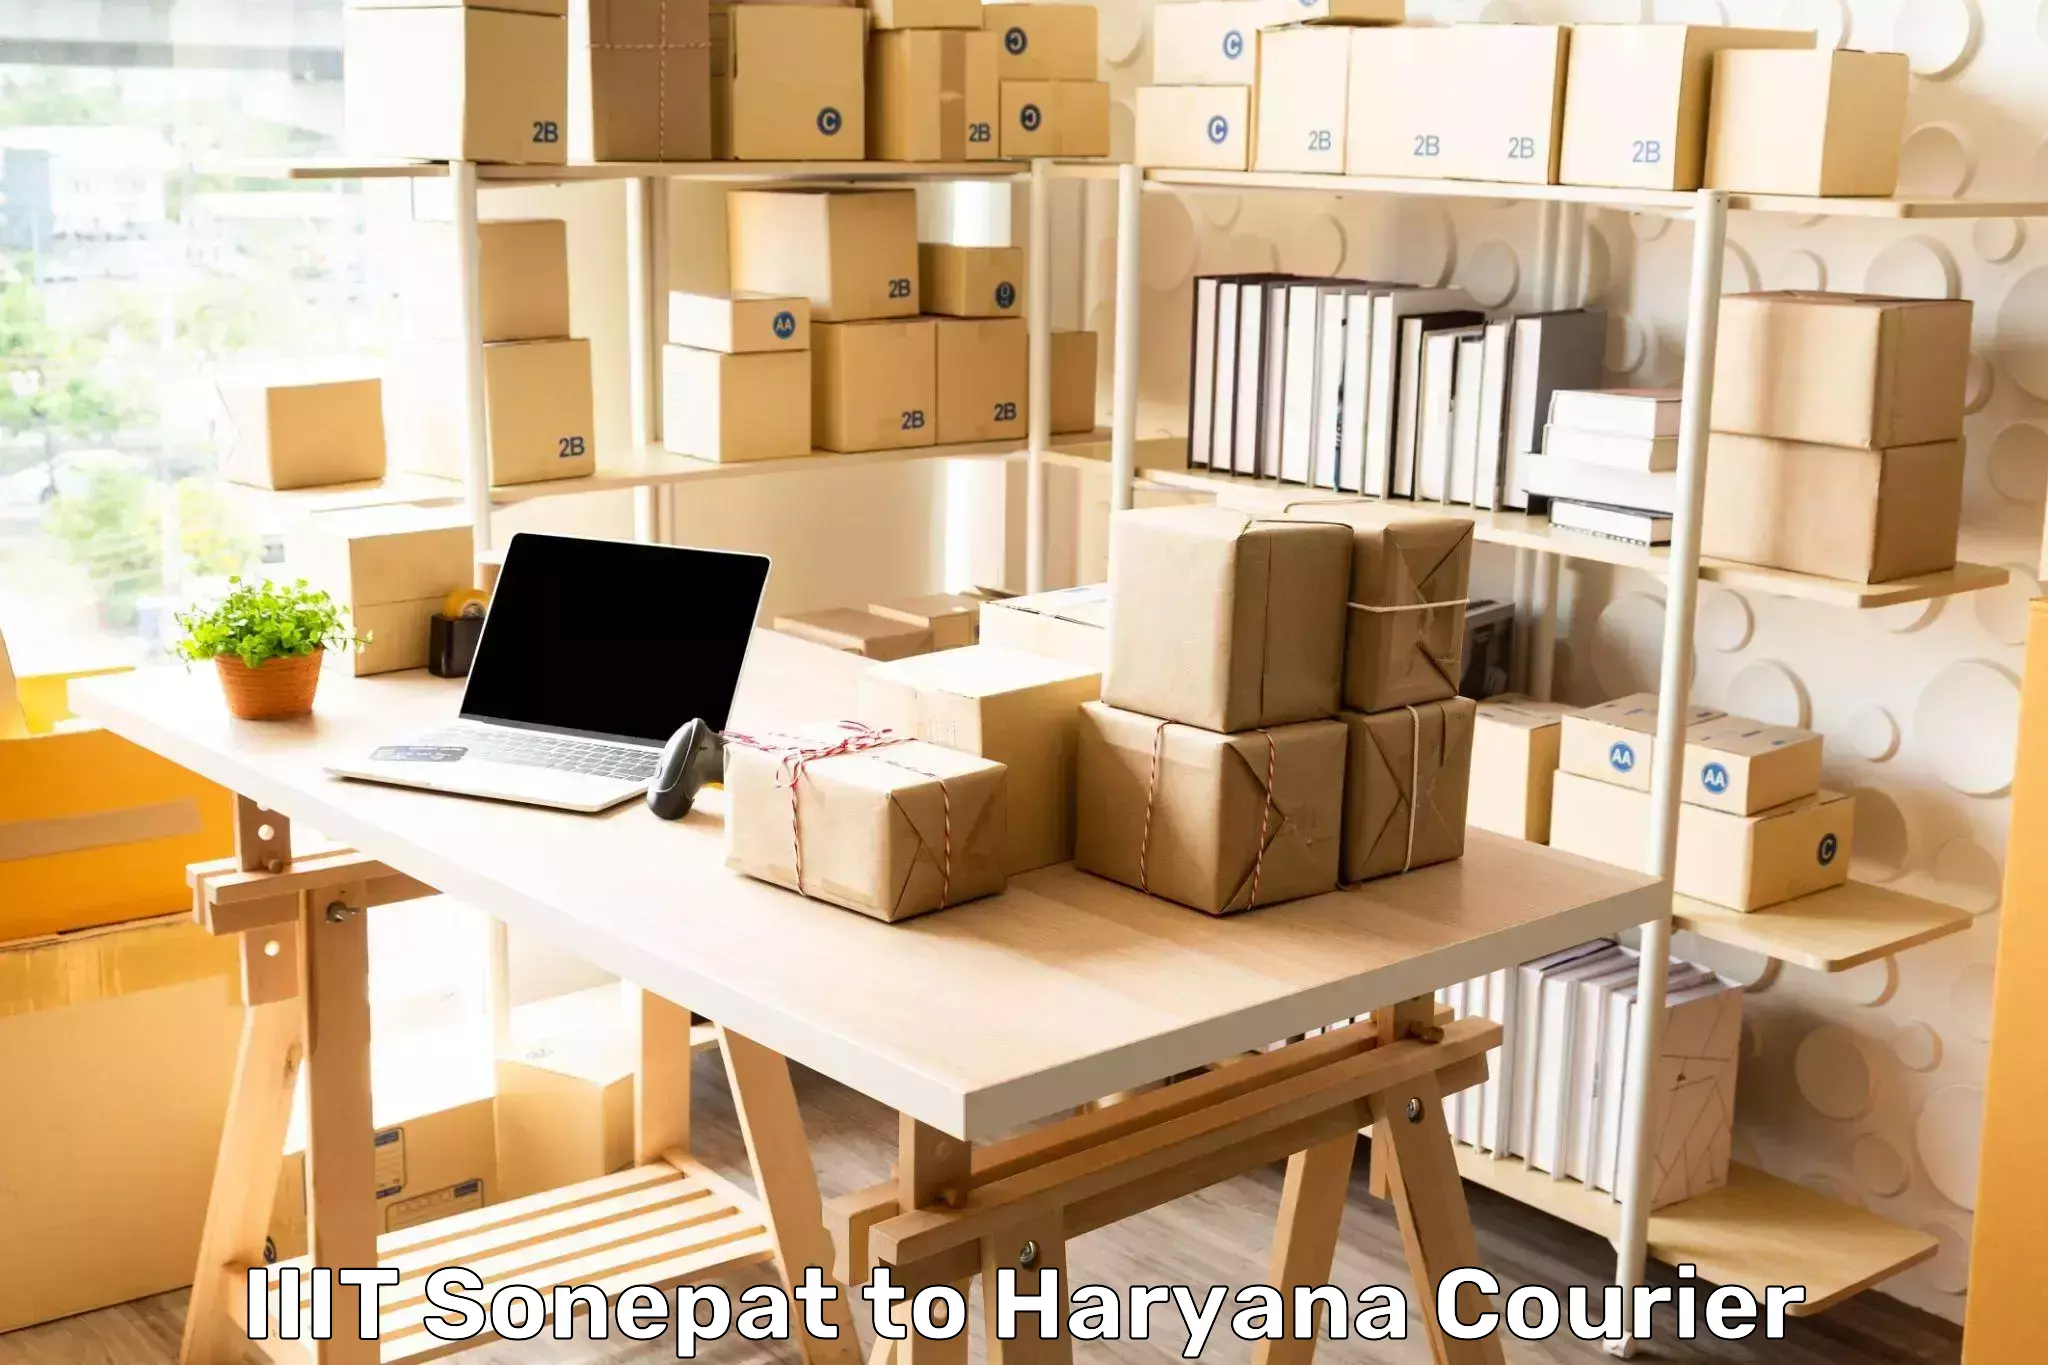 Supply chain delivery IIIT Sonepat to Sohna